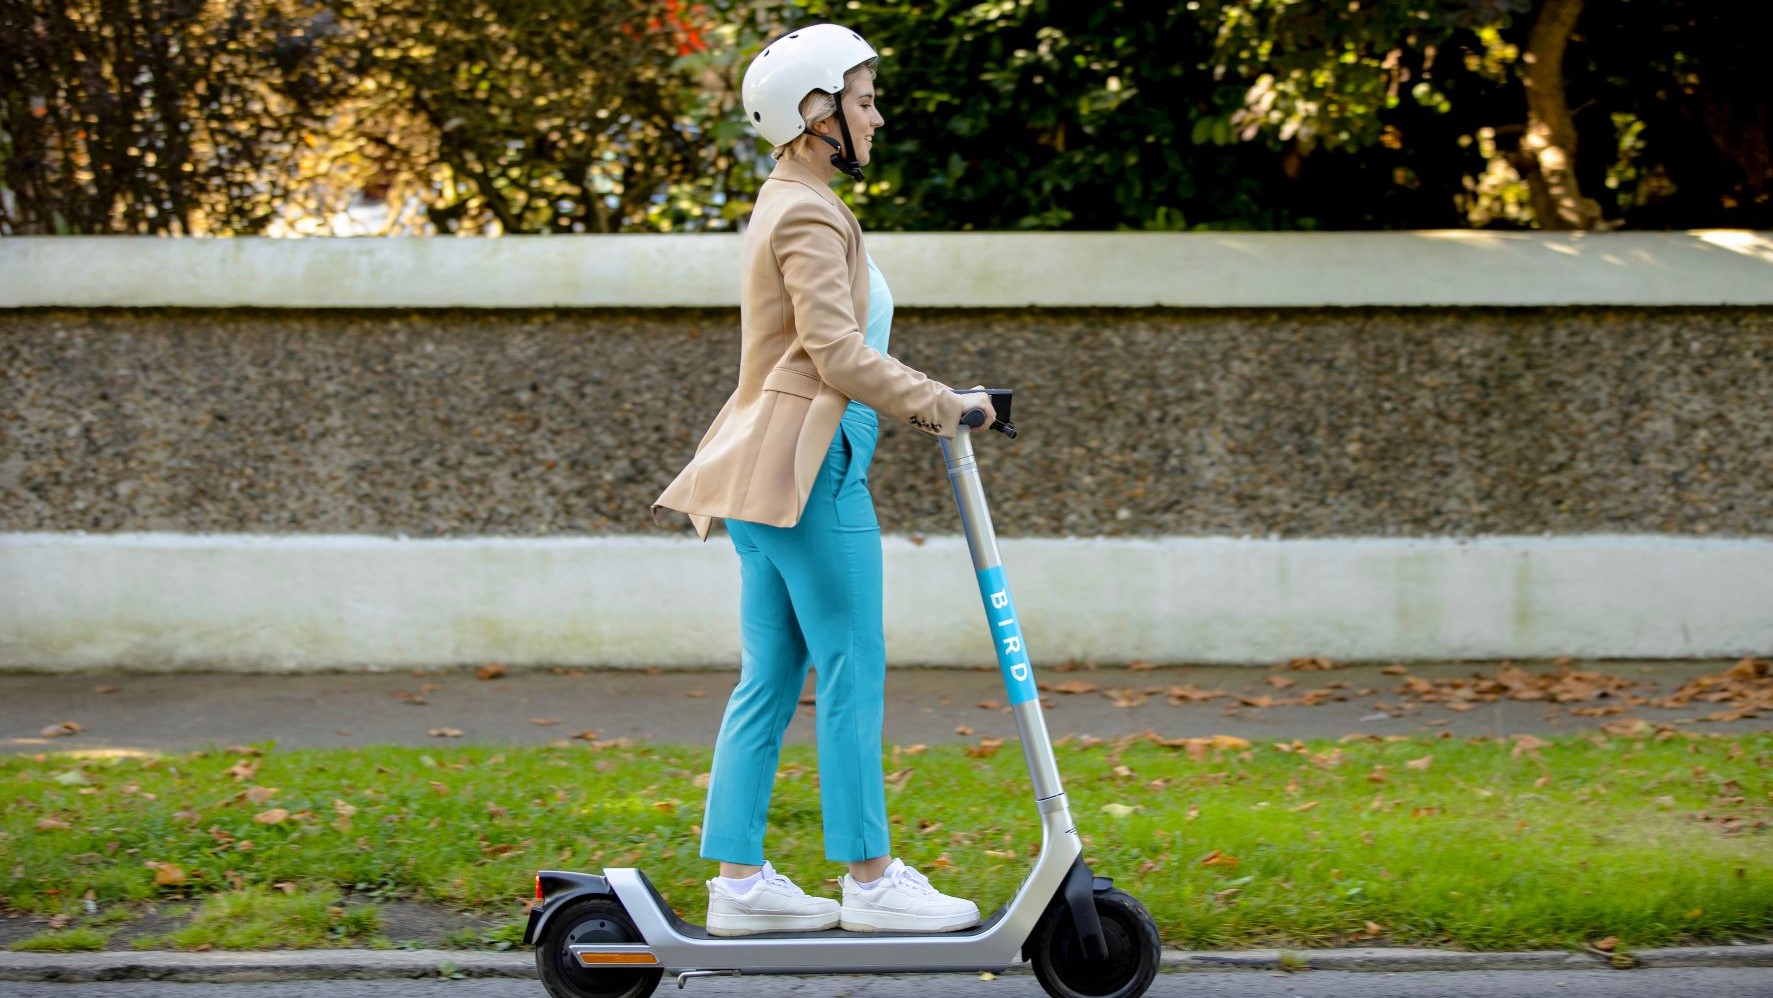 Side profile, full shot of a woman with a white helmet, bright blue pants and a brown coat riding a Bird Canada electric scooter over pavement on a sunny day. Green grass, a garden wall, and trees are in the background.